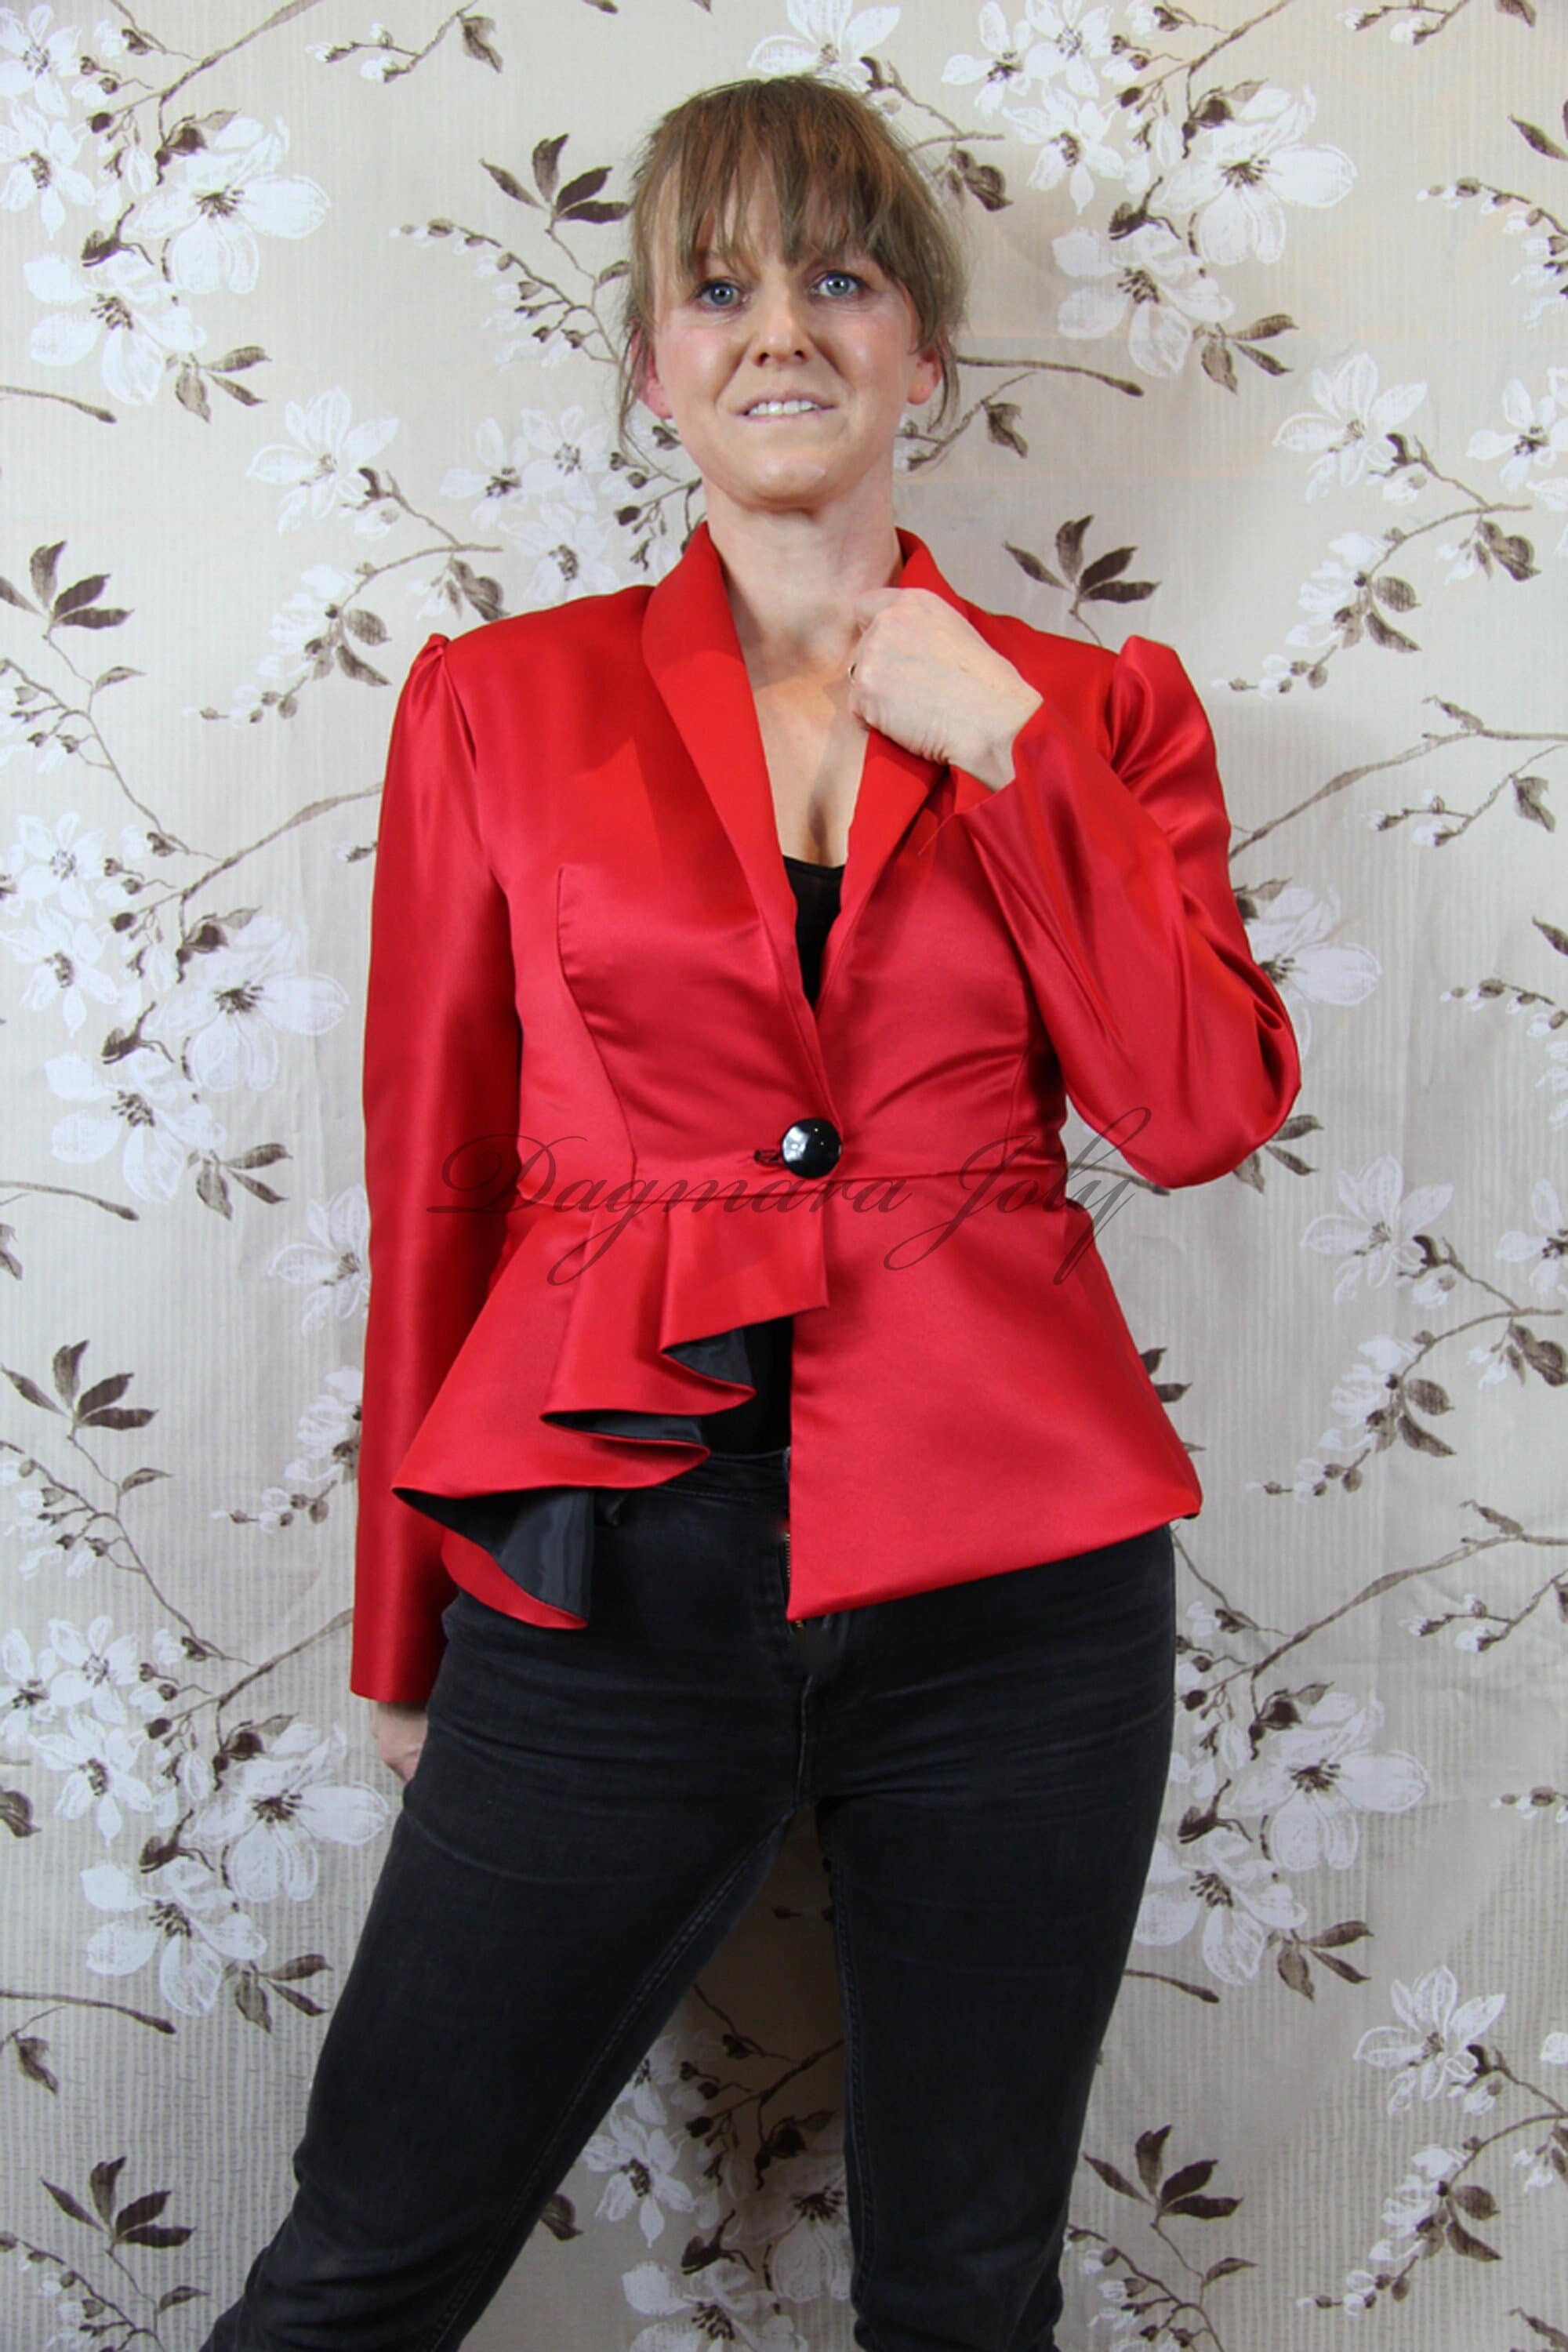 Women Slim Fit Red Jacket Peplum Women Clothes Red -